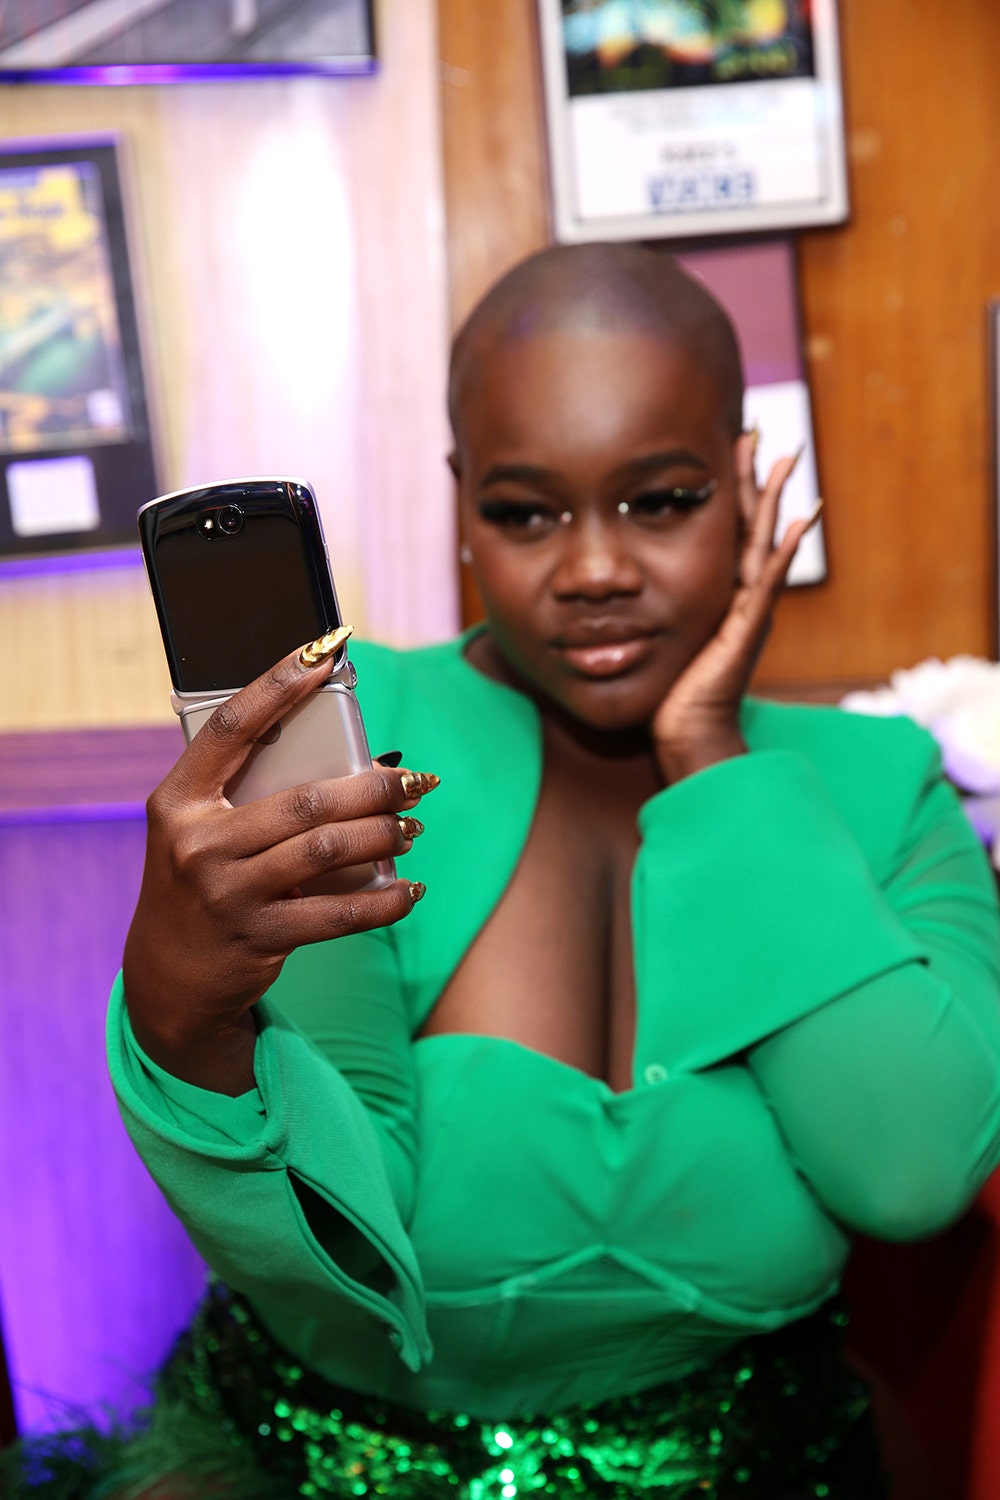 Achieng Agato is wearing a bright green top and holding a cell phone.